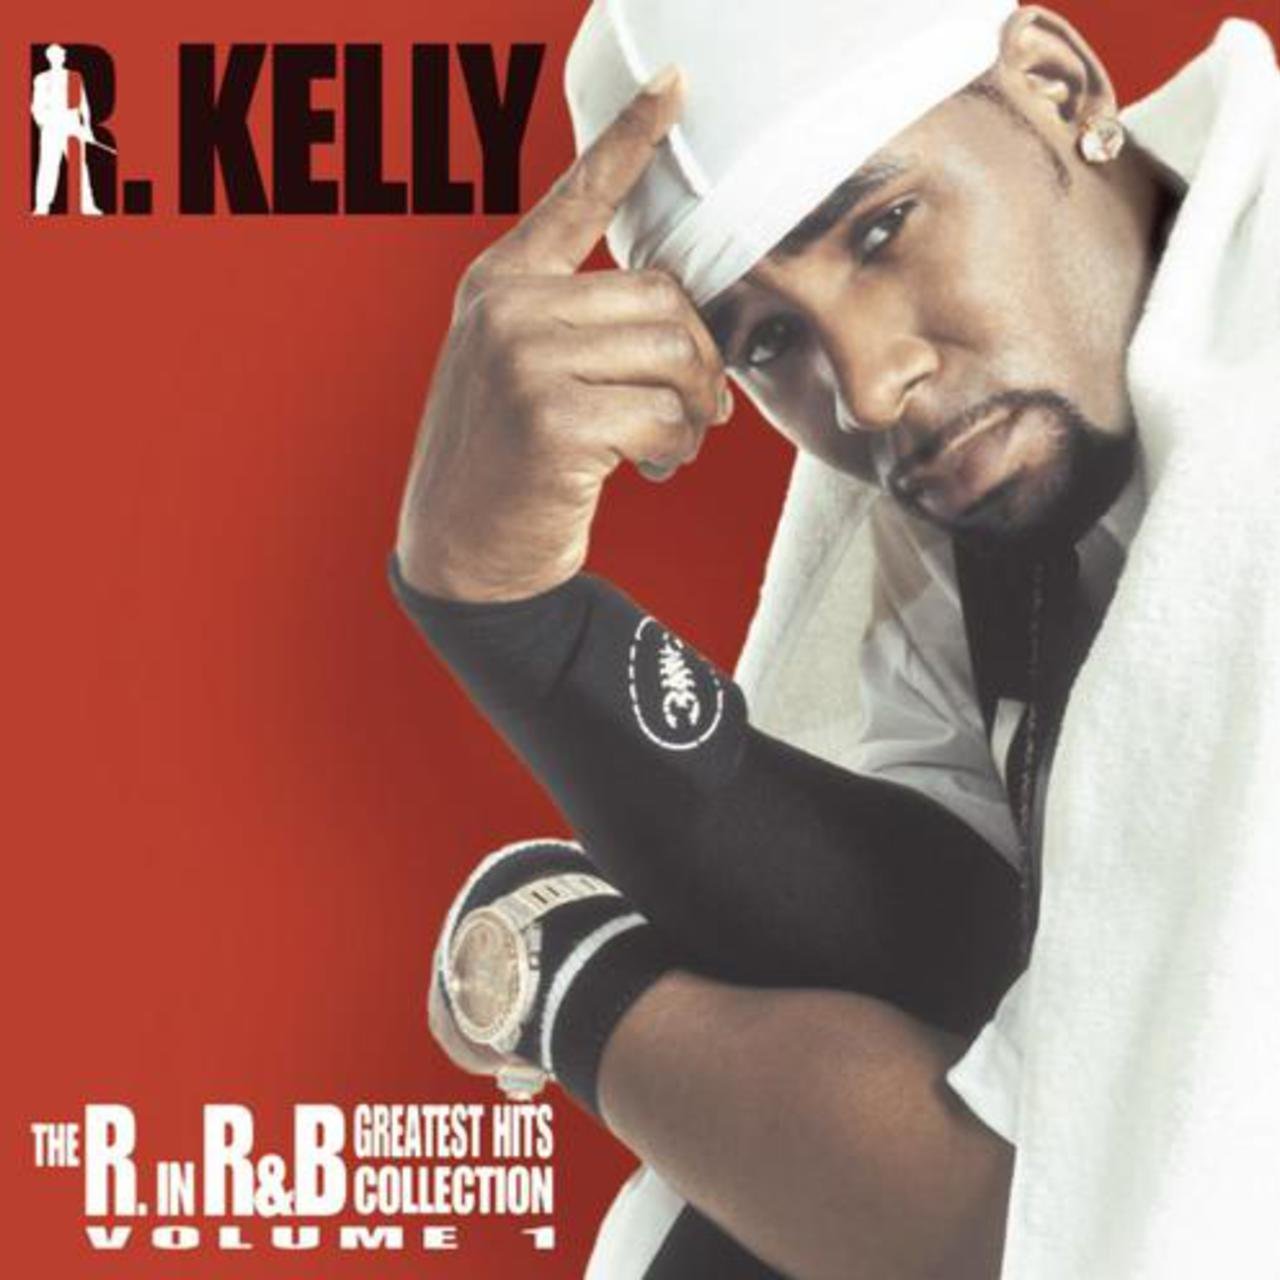 R. Kelly - The R. In R and B Collection Volume 1 (Cover)